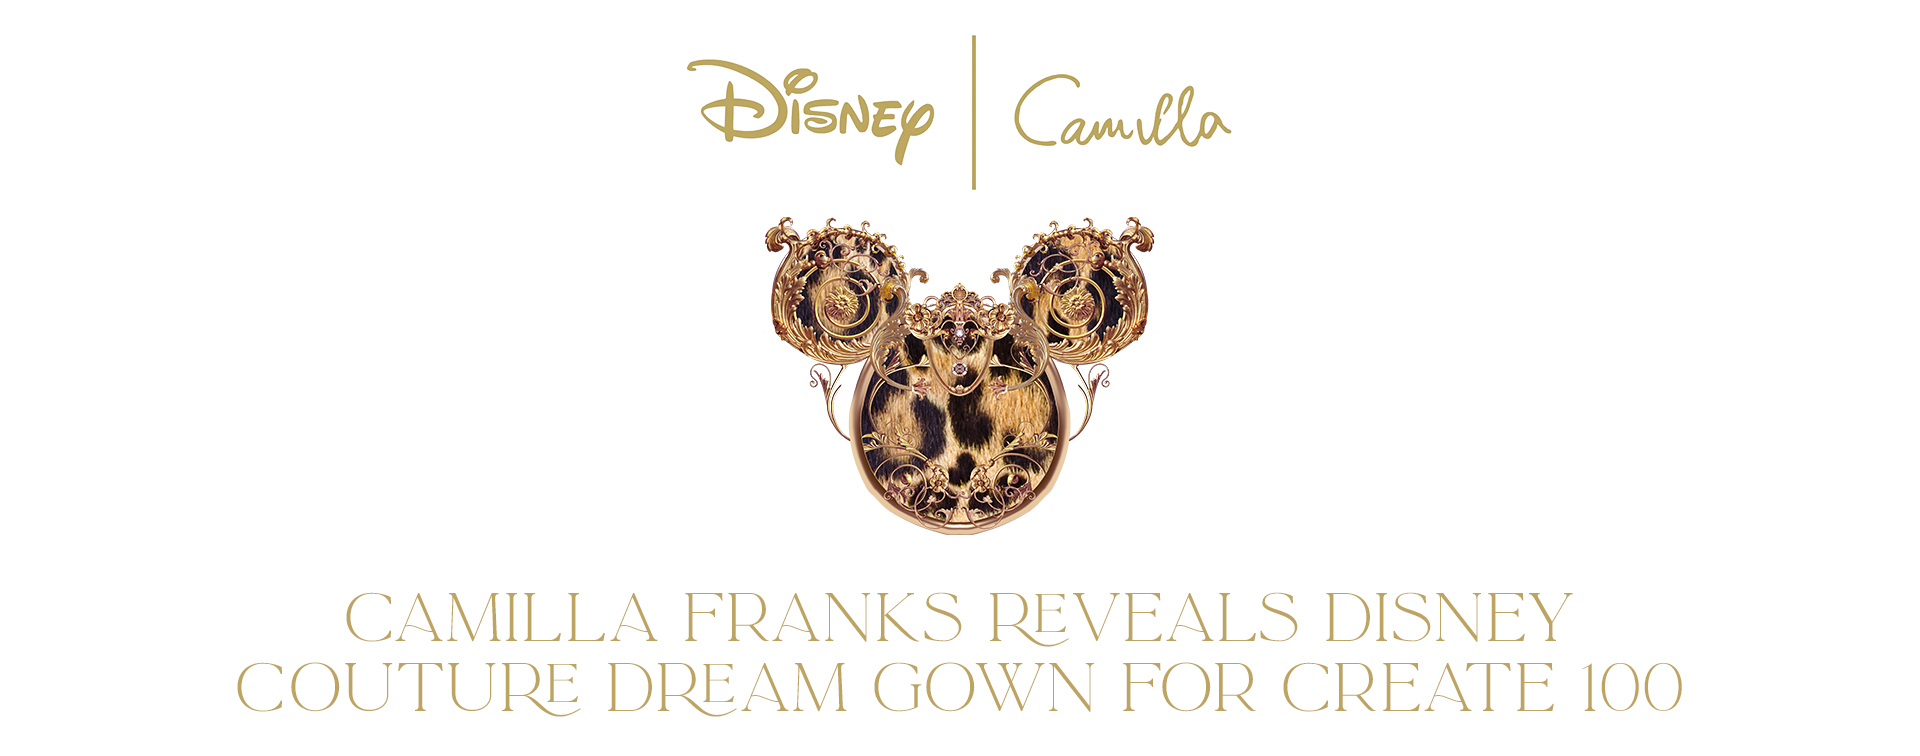 Camilla Franks reveals Disney couture dream gown for Create 100